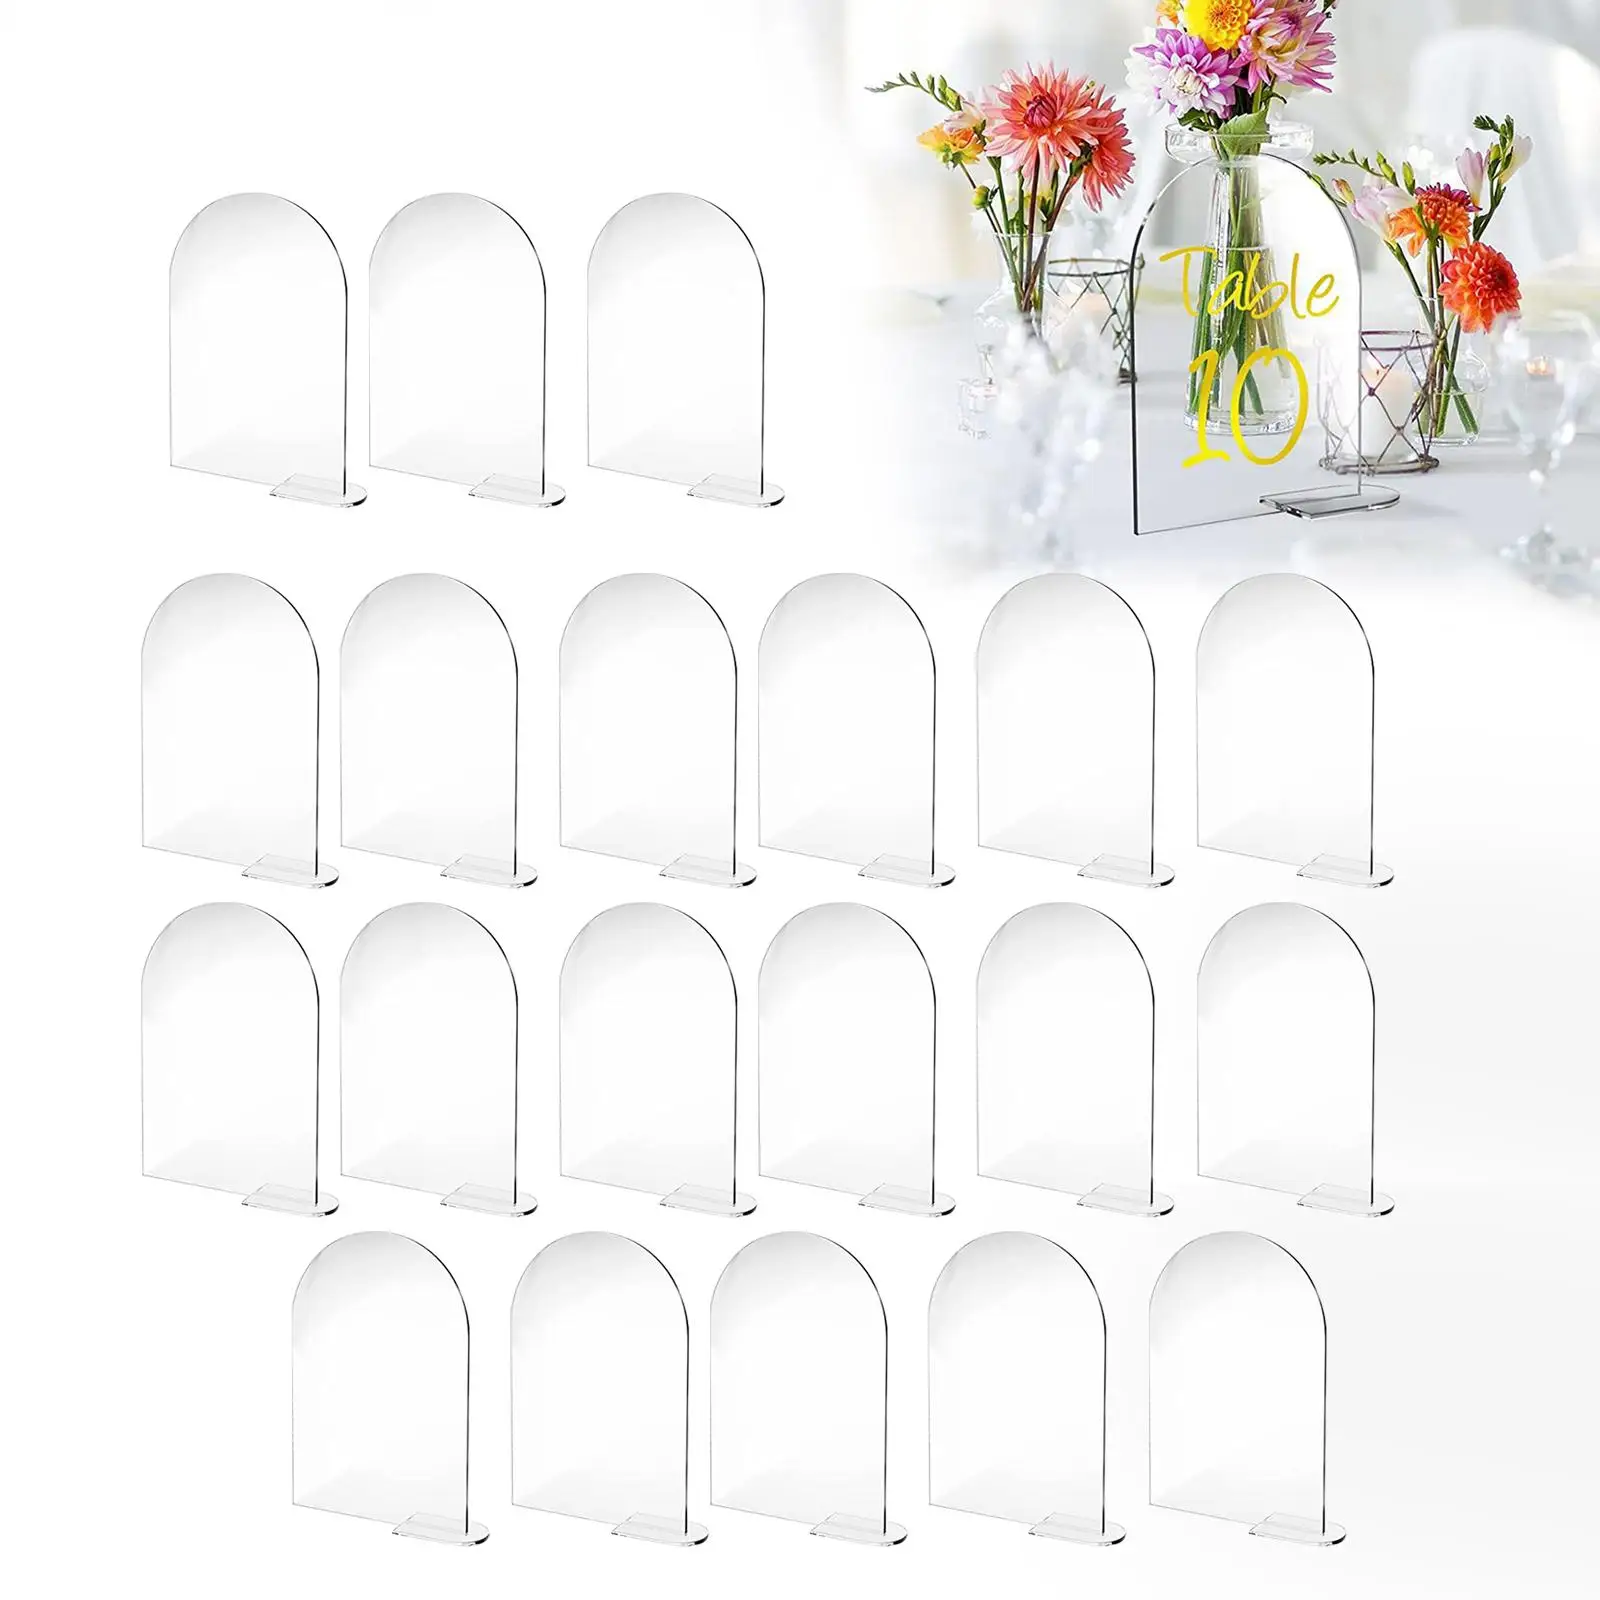 20Pcs Clear Acrylic Place Cards Hand Written with Stand Holder Display Arched Round Blank Menu Signs for Banquet Decoration